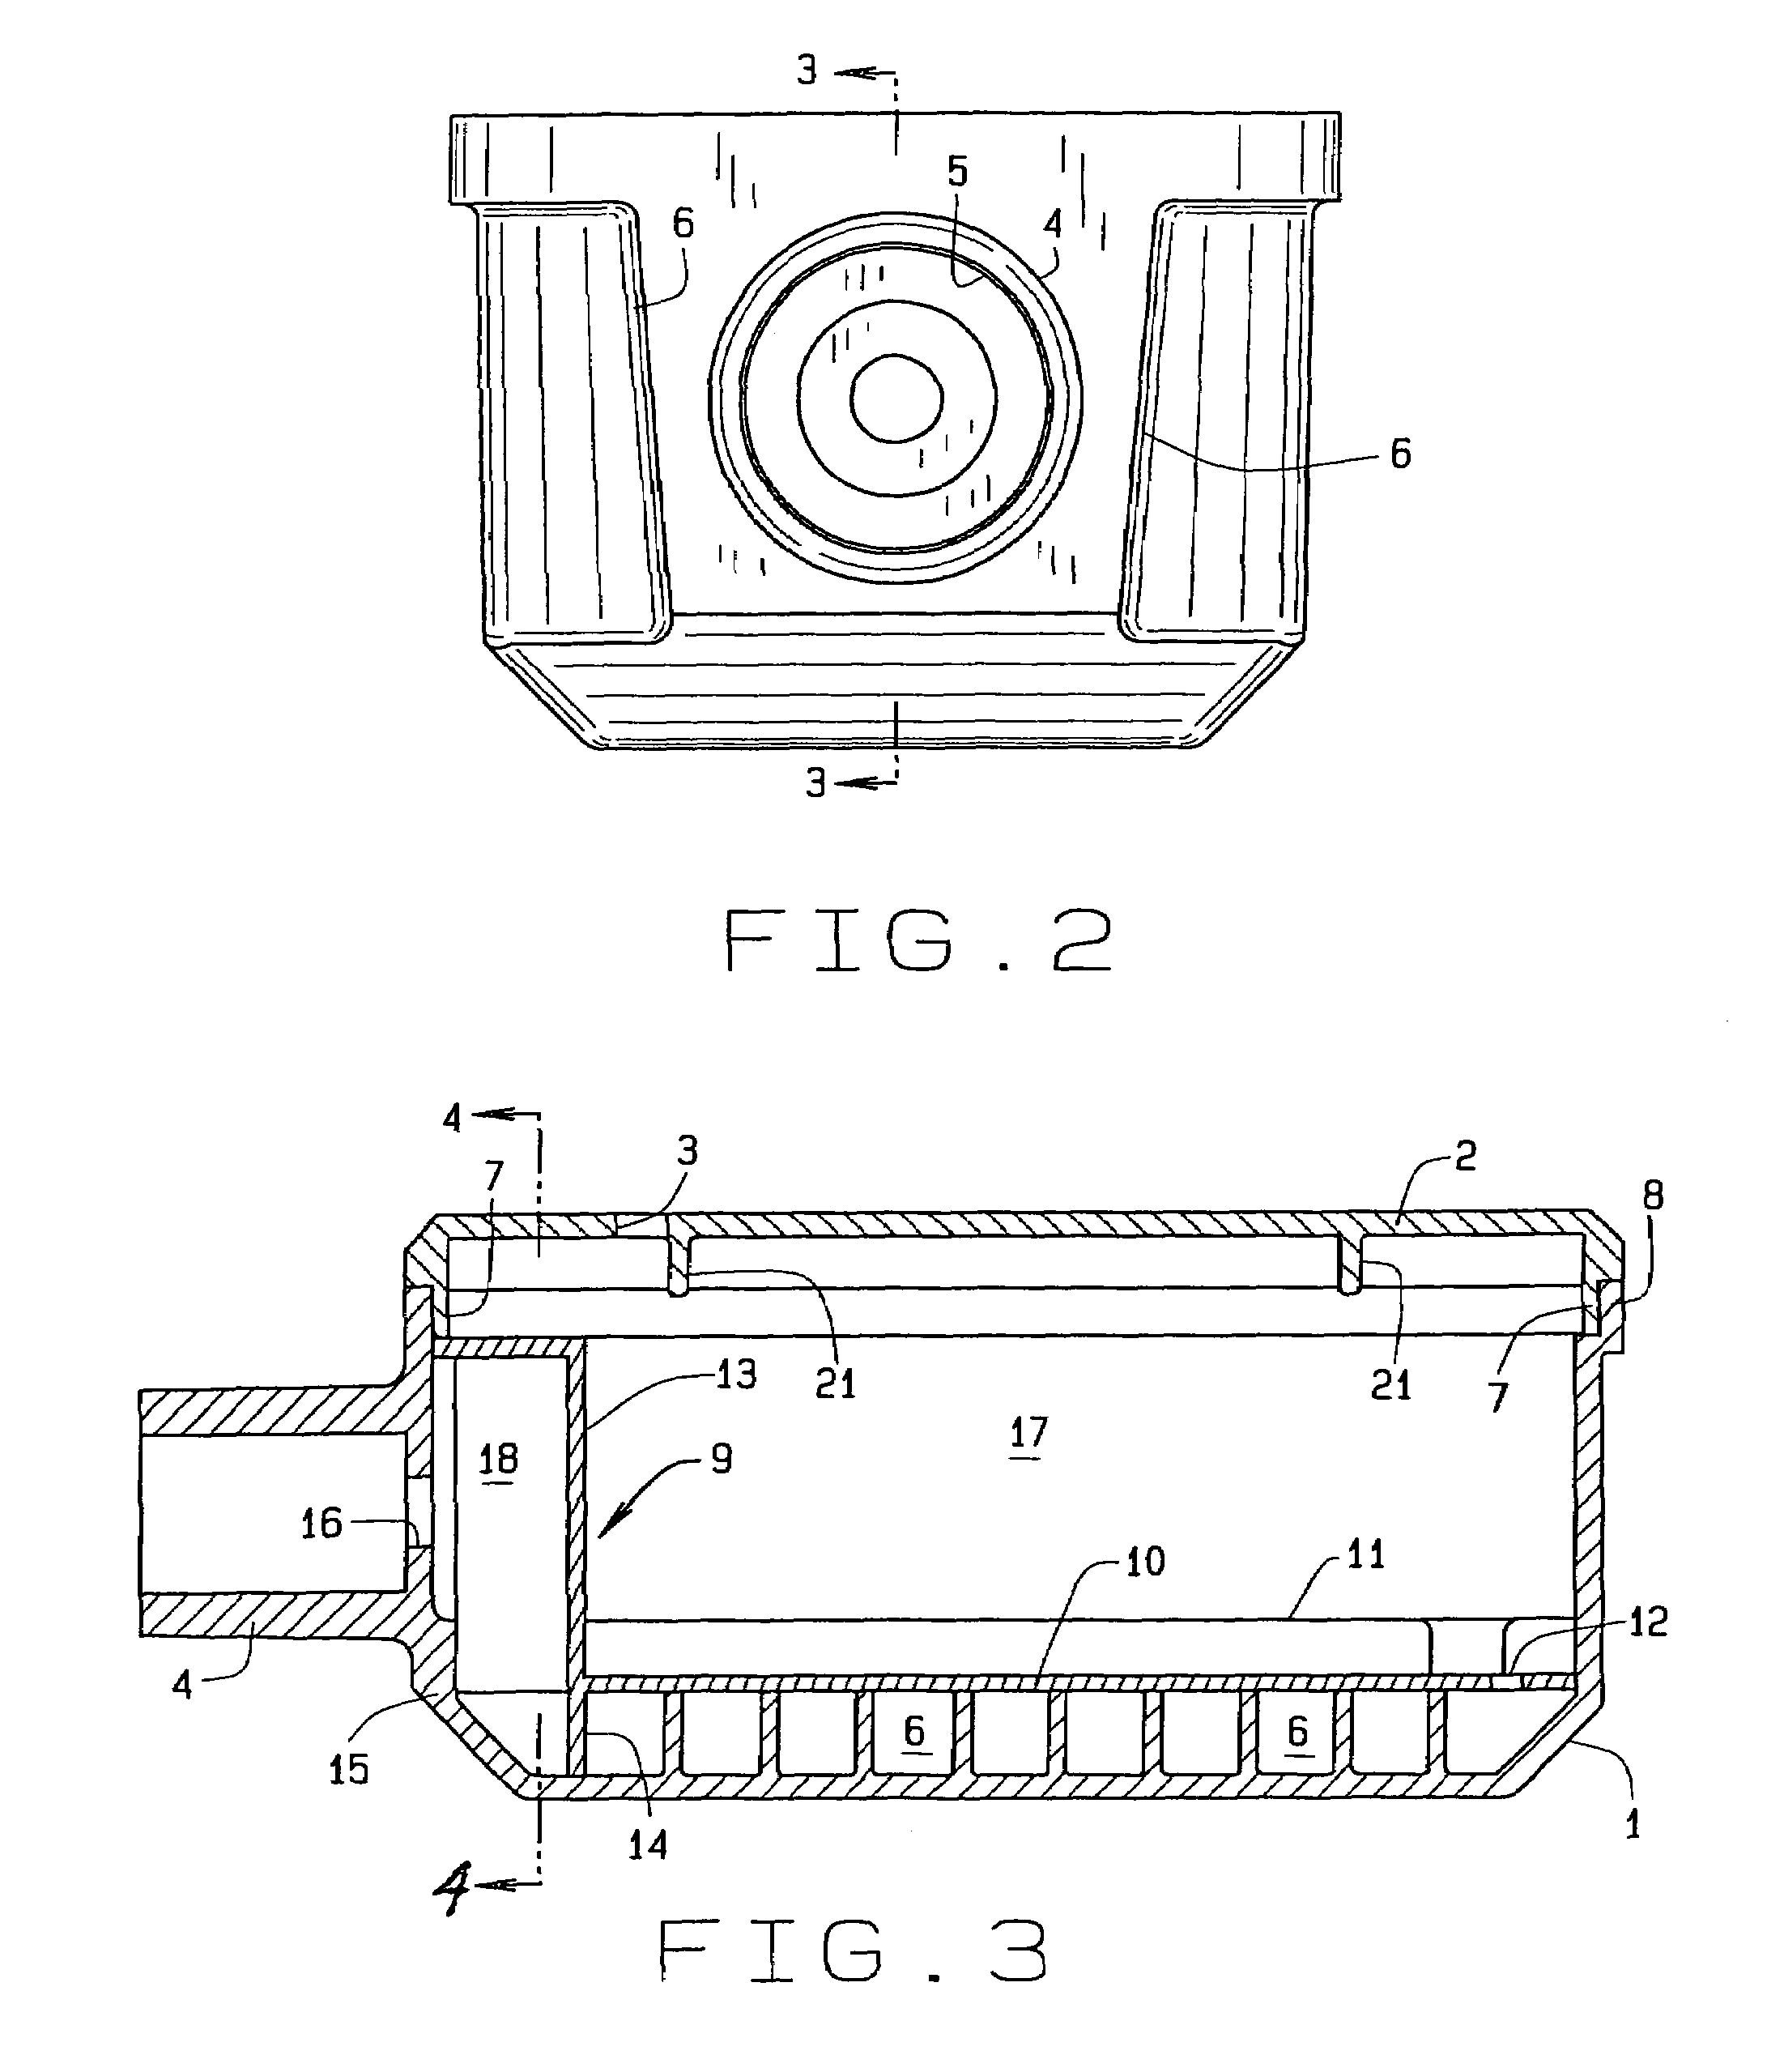 Air filtering assembly for use with oxygen concentrating equipment